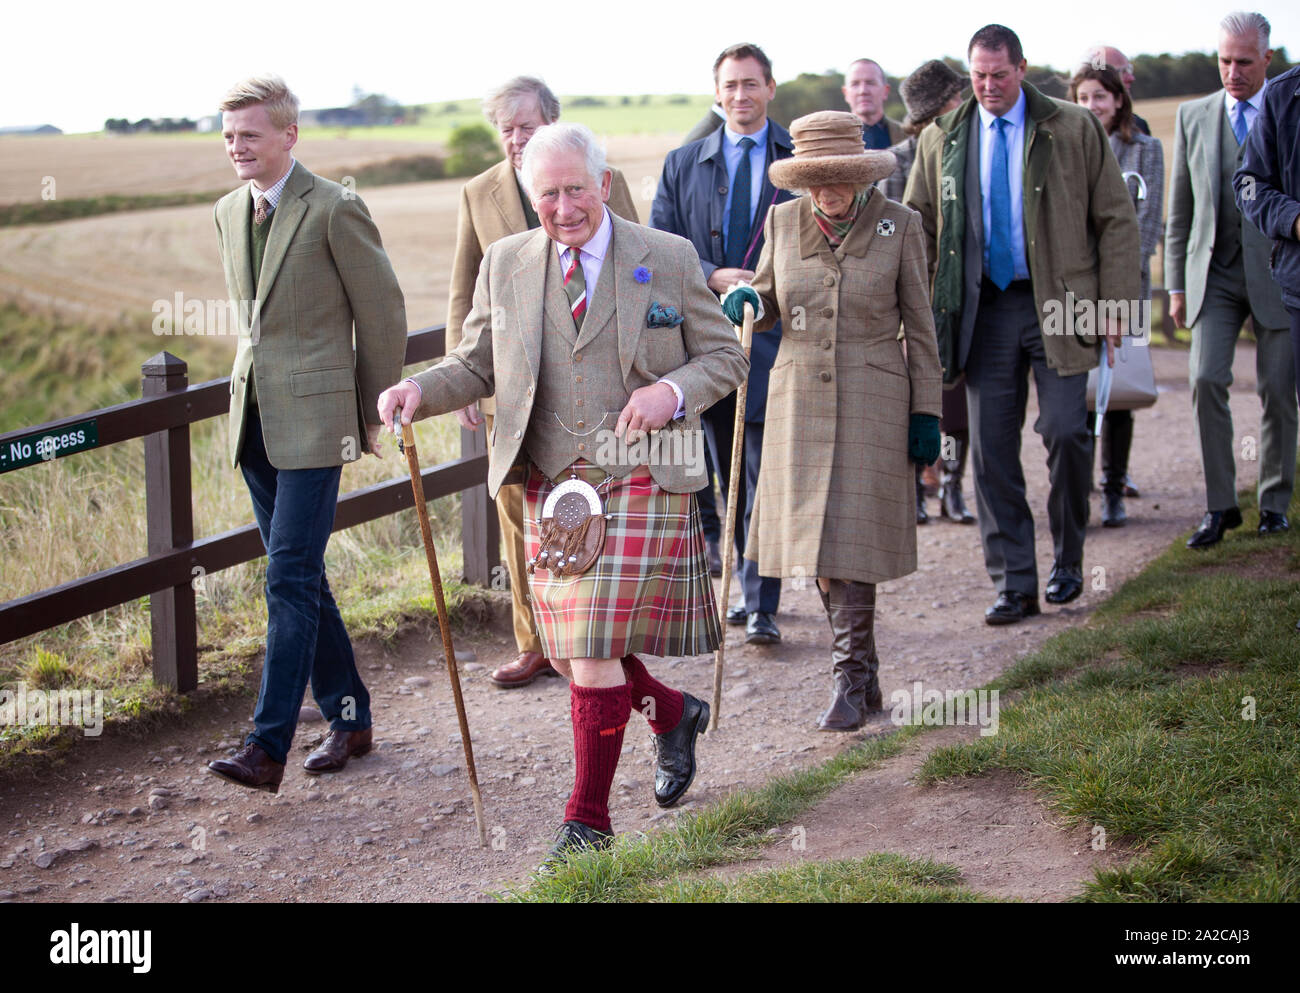 The Prince of Wales and Duchess of Cornwall, known as the Duke and Duchess of Rothesay while in Scotland, accompanied by castle owner George Pearson (front left), during a visit to Dunnottar Castle, the cliff top fortress which was once the home of the Earls Marischal, near Stonehaven. Stock Photo